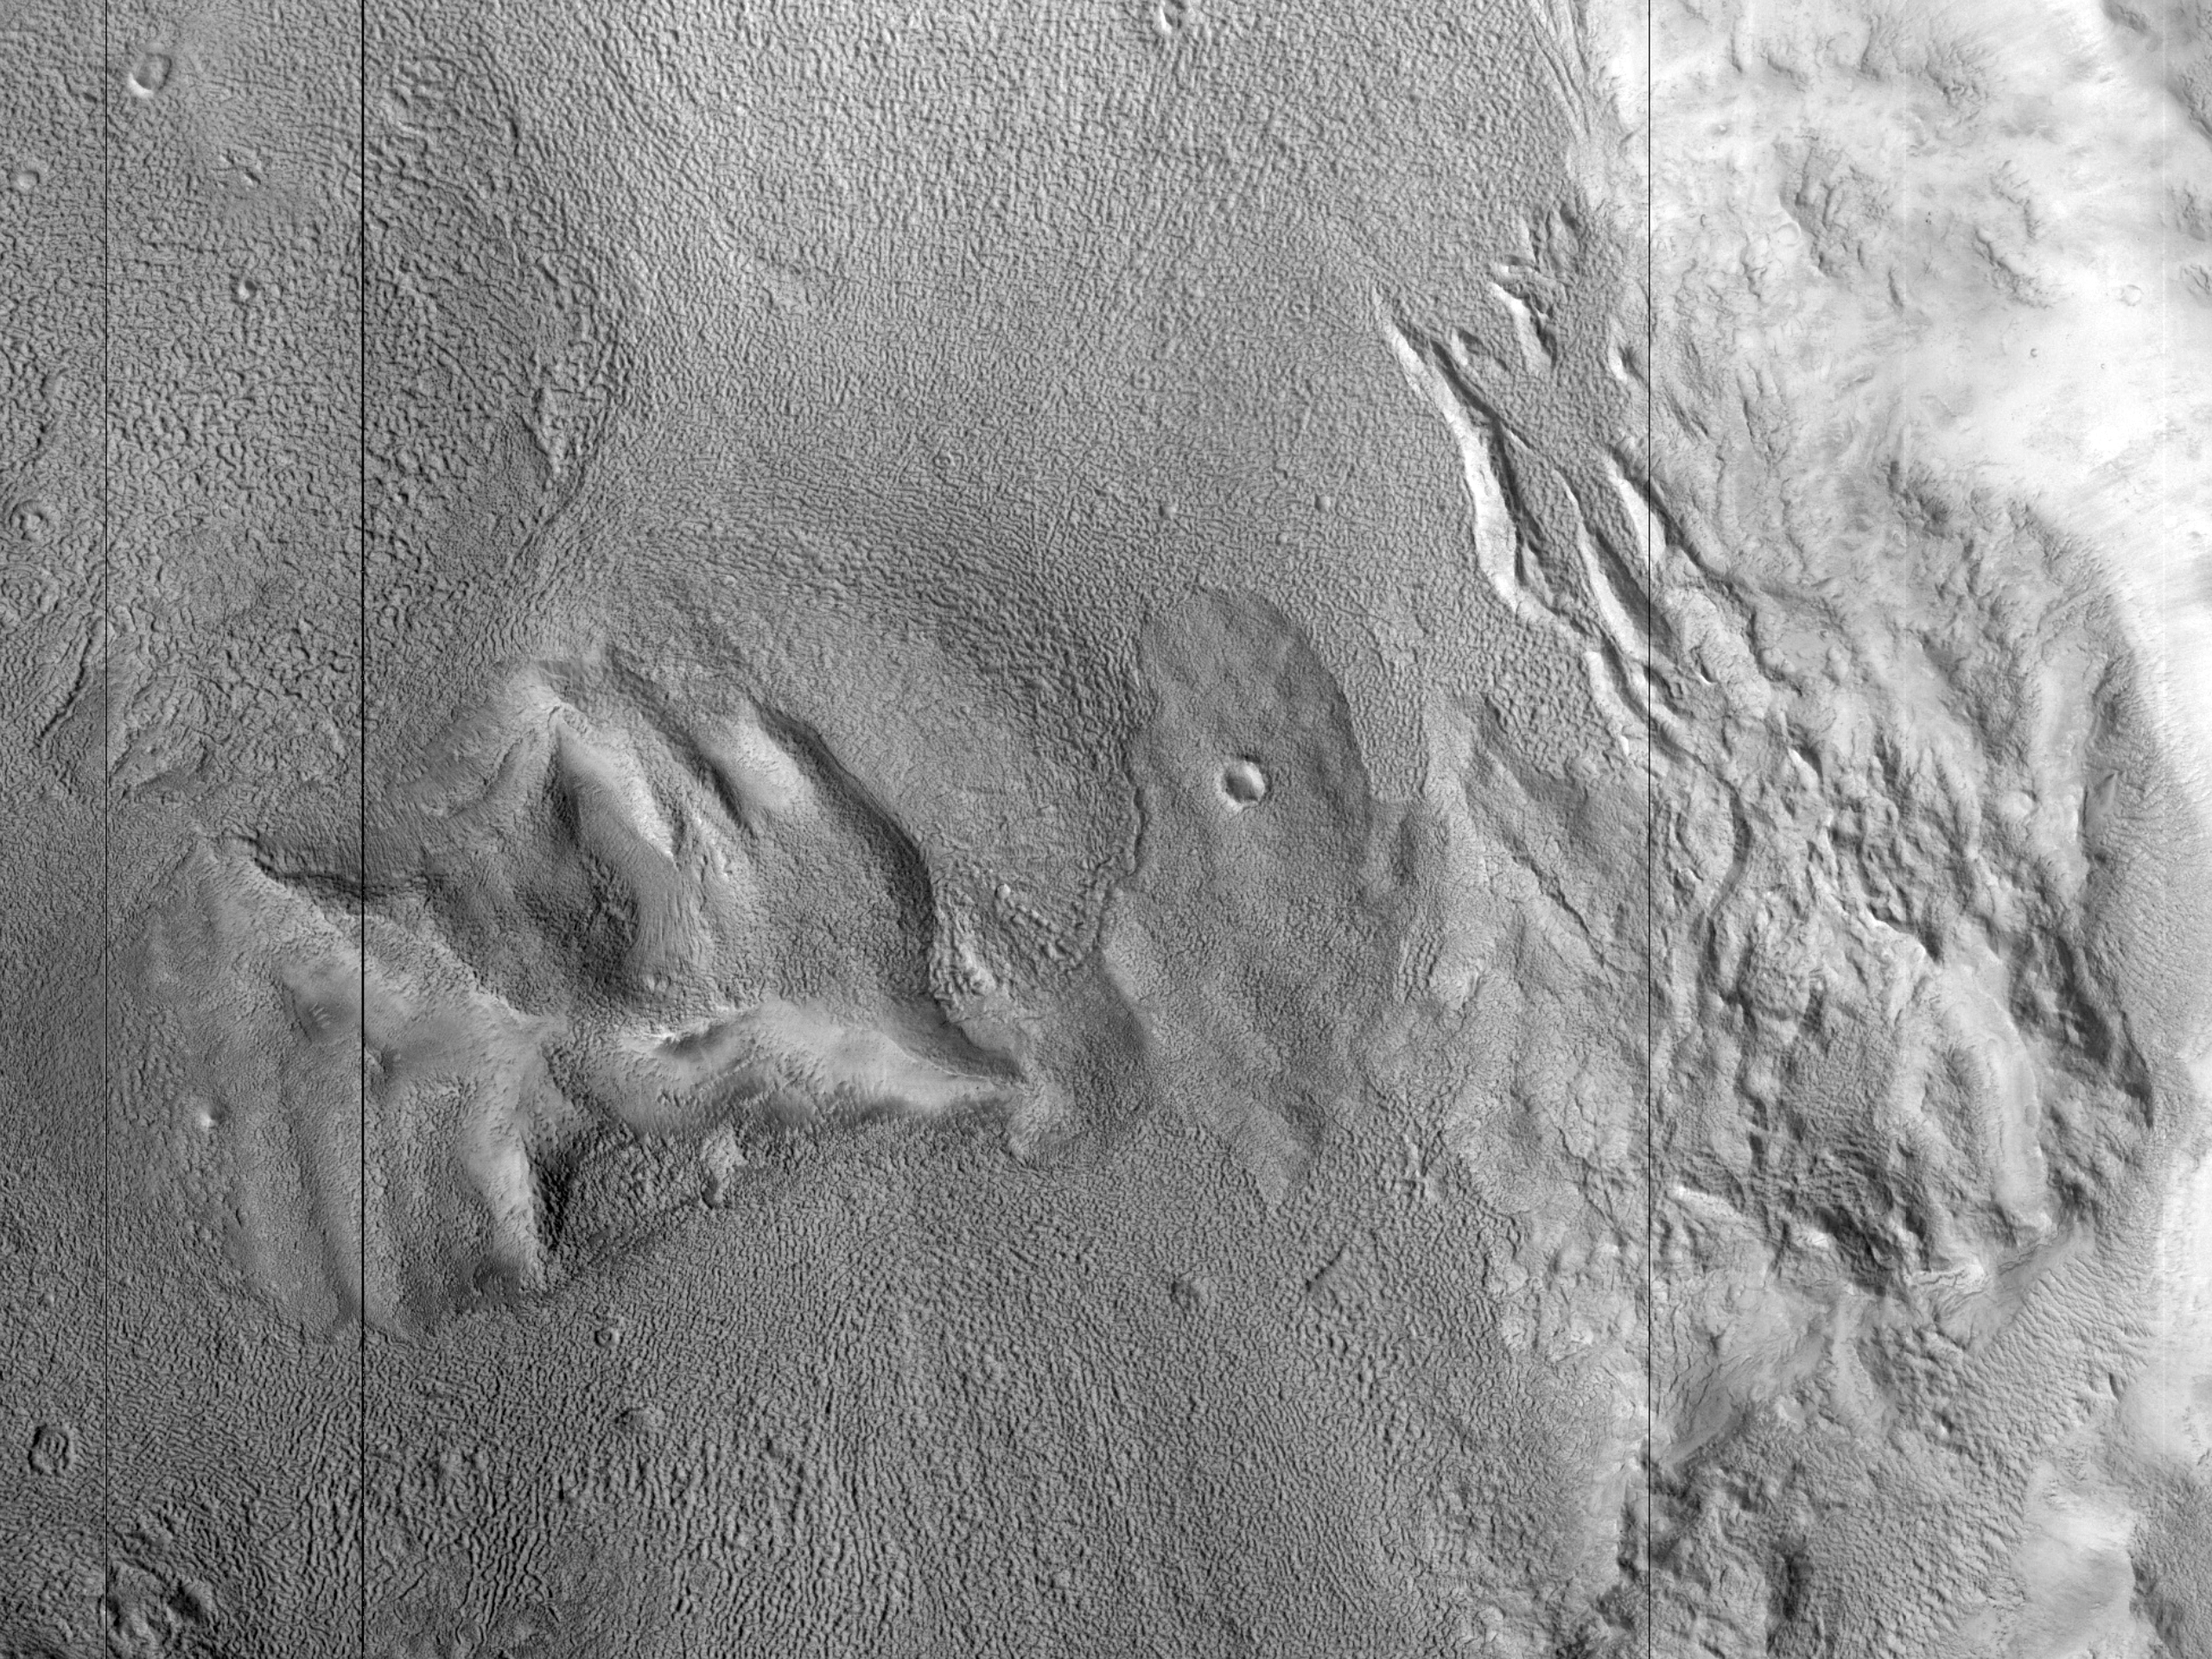 Features on a Crater Floor